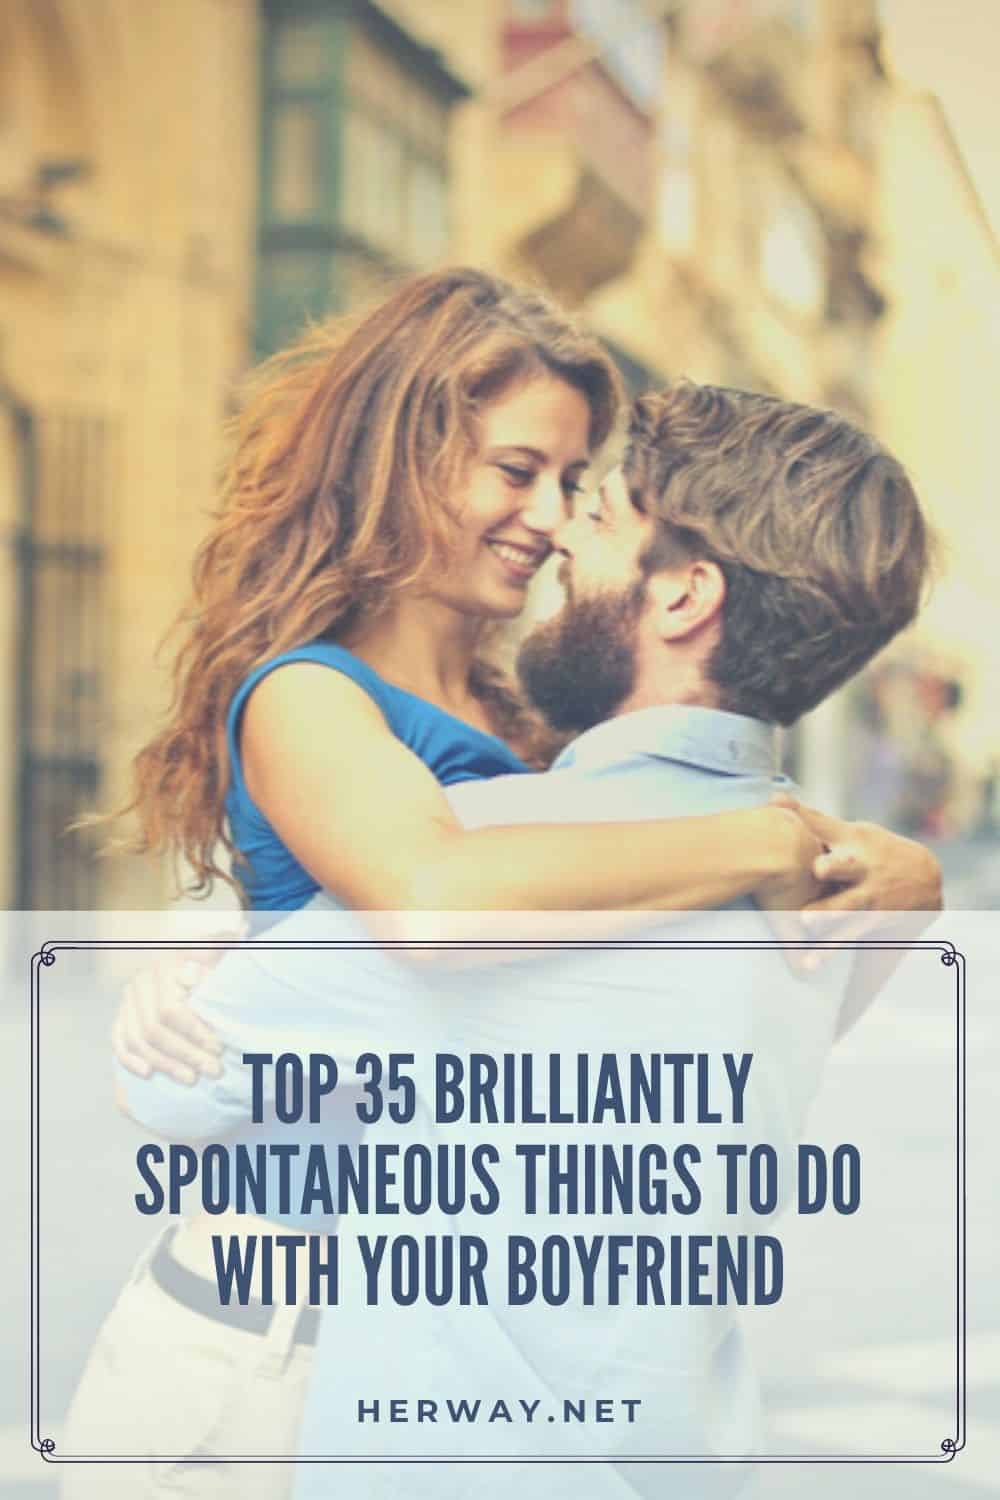 Top 35 Brilliantly Spontaneous Things To Do With Your Boyfriend